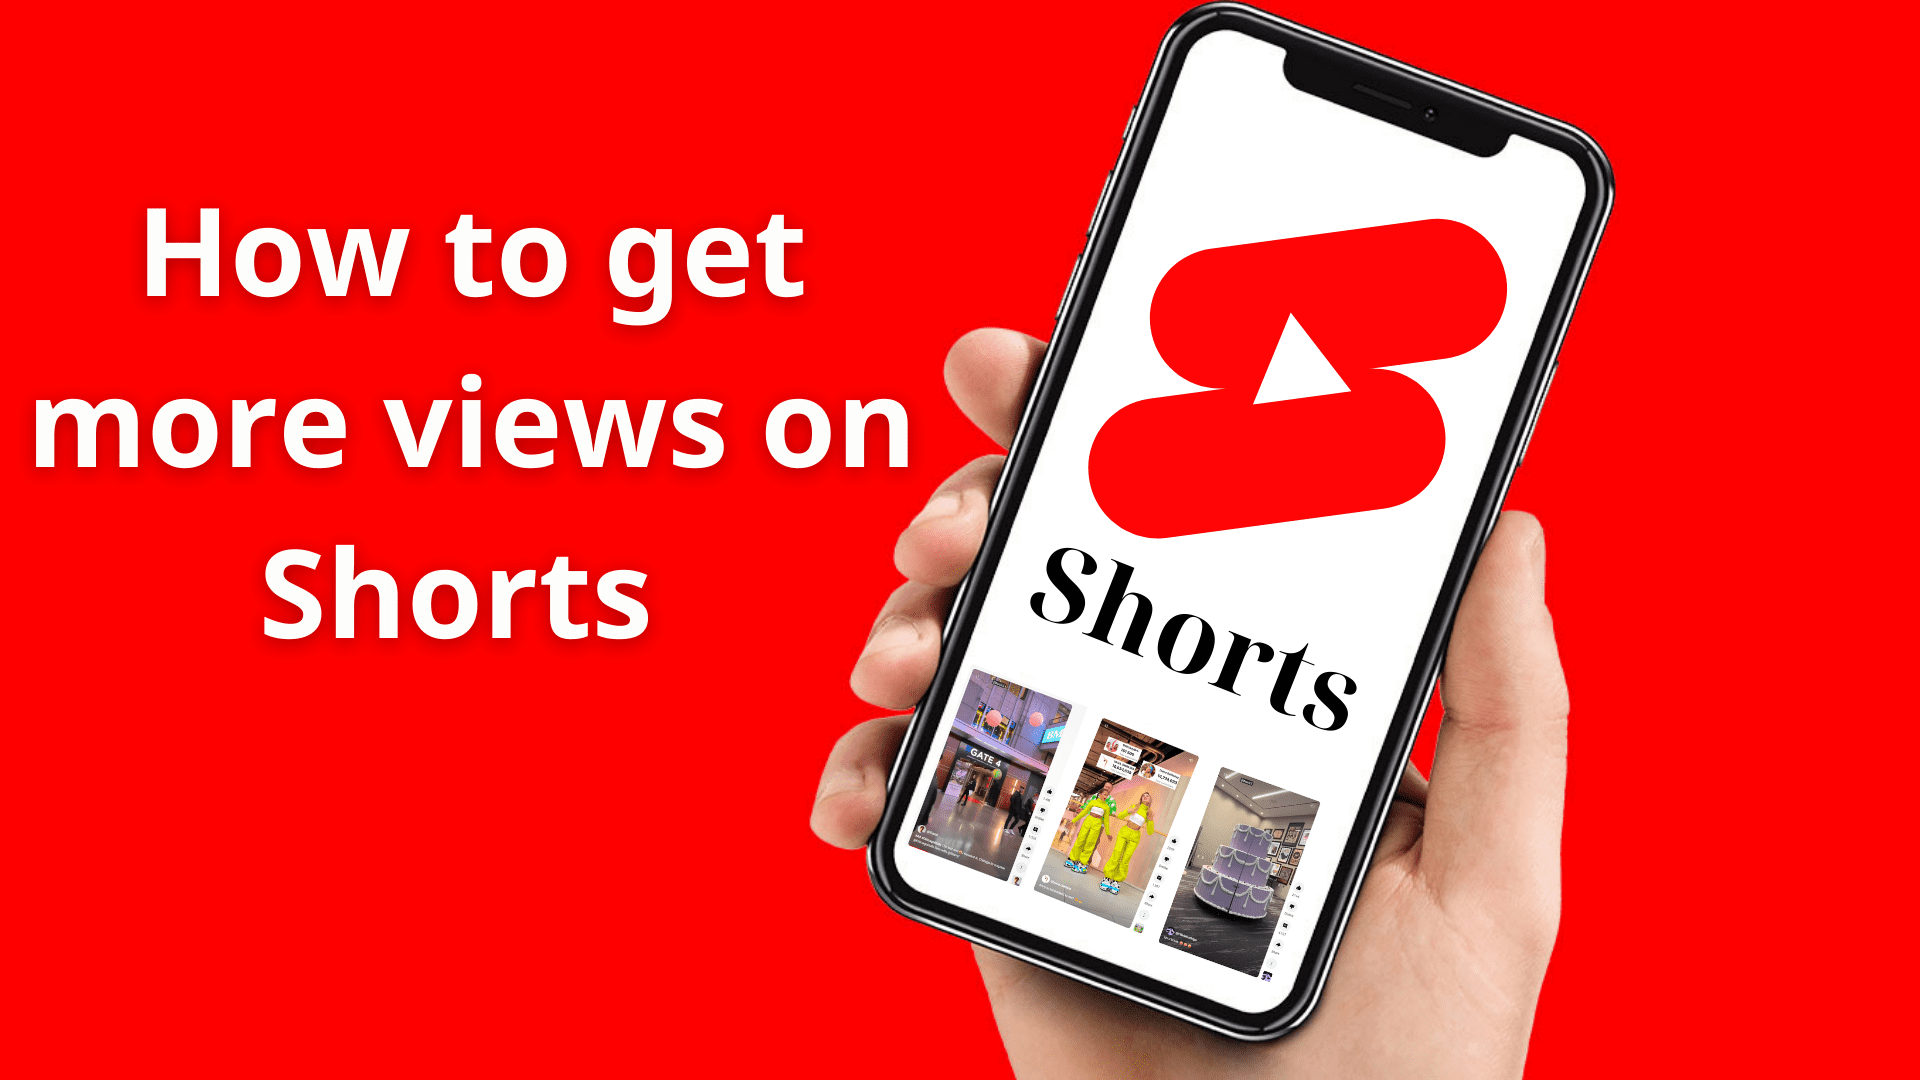 how-to-increase-youtube-shorts-views